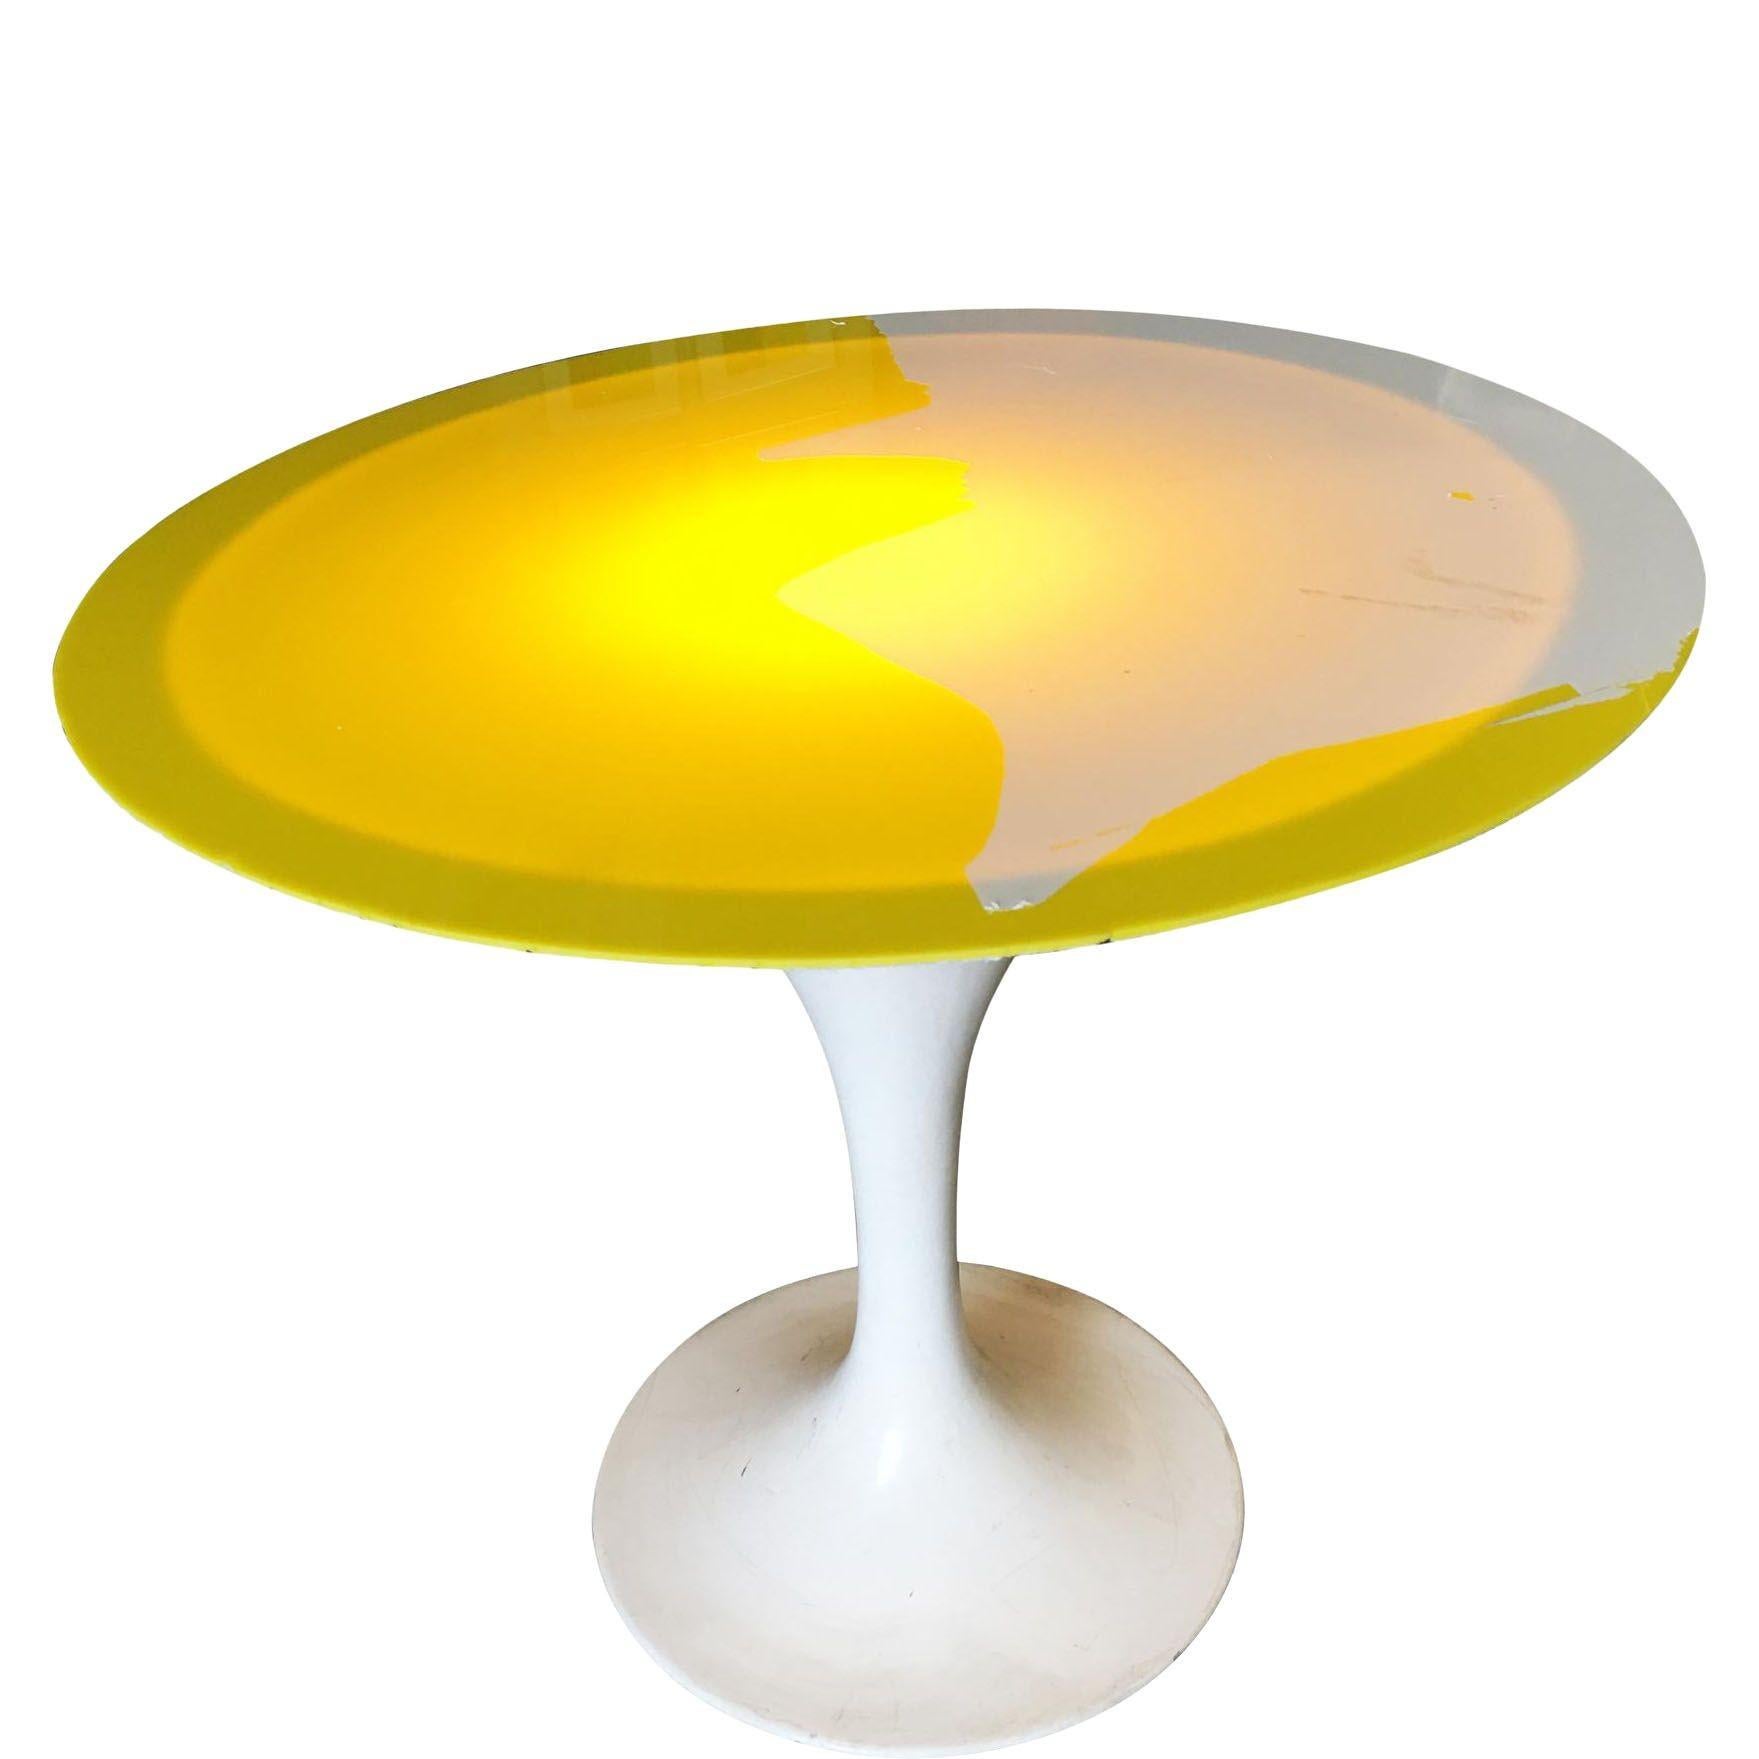 Modernist Light Up Tulip Style Coffee Table In Excellent Condition For Sale In Van Nuys, CA